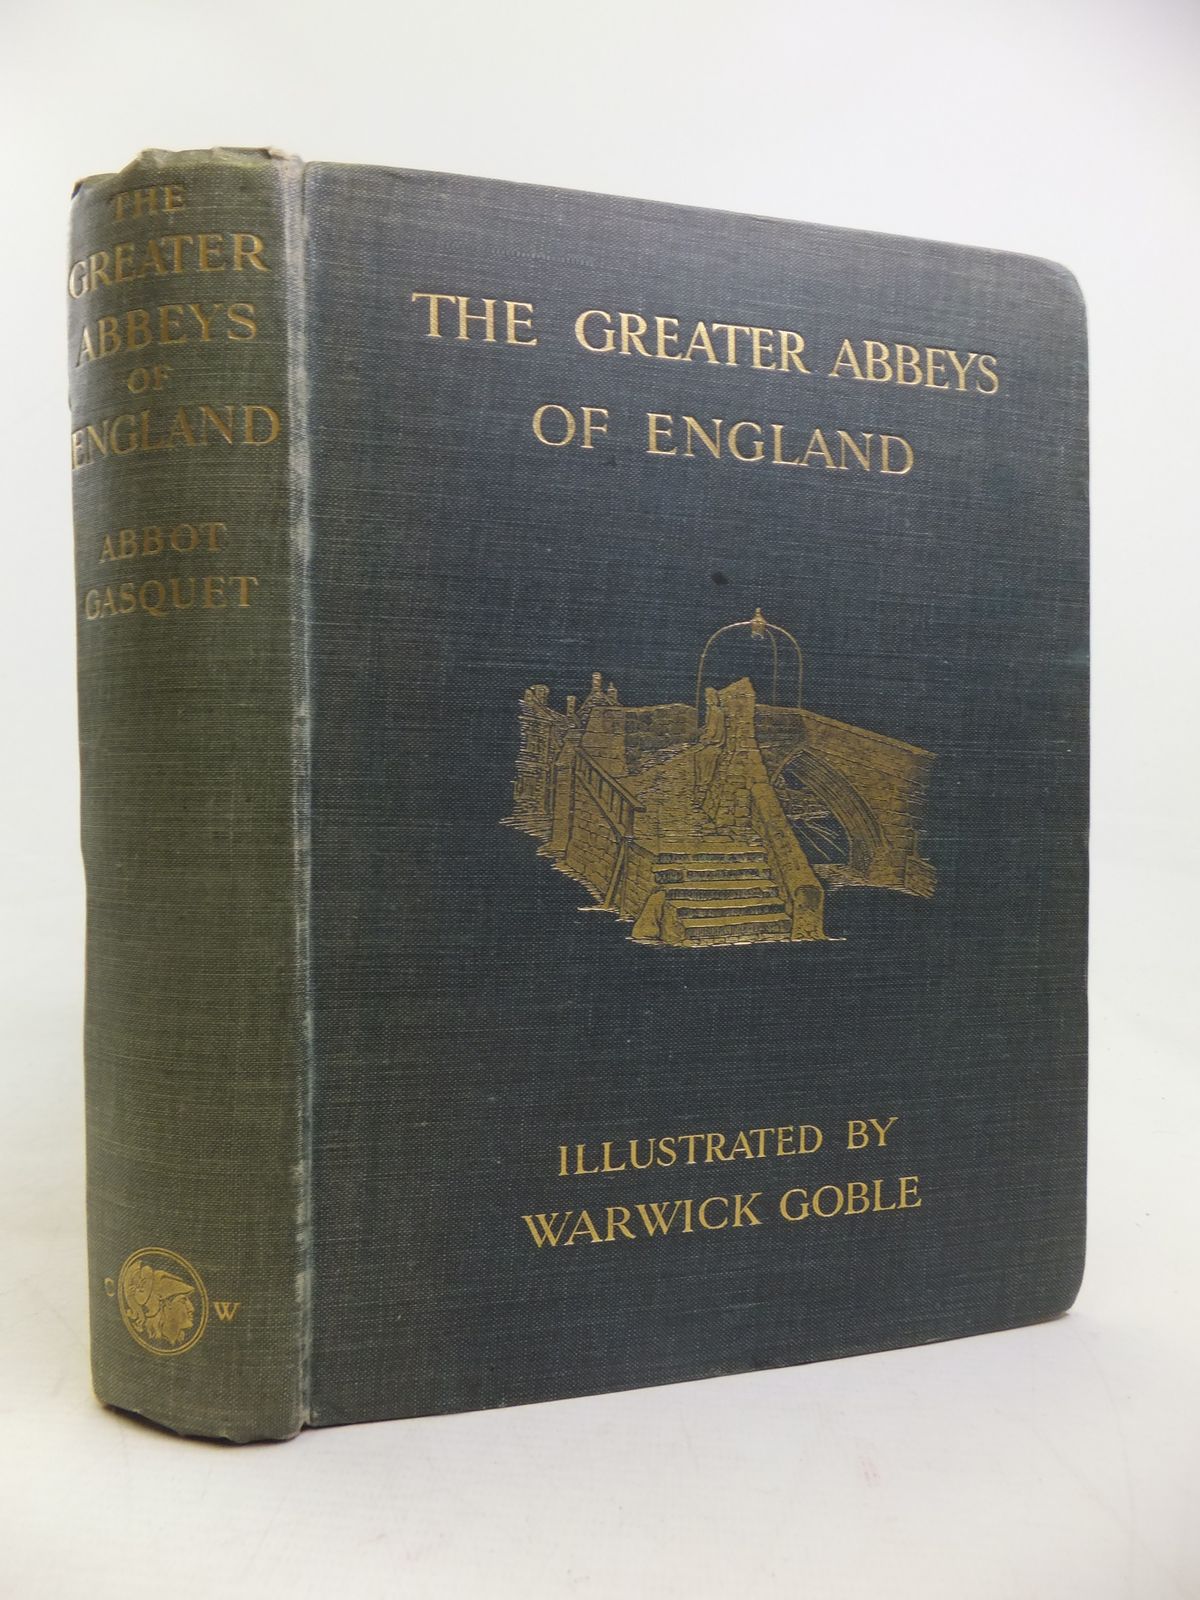 Photo of THE GREATER ABBEYS OF ENGLAND written by Gasquet, Abbot illustrated by Goble, Warwick published by Chatto & Windus (STOCK CODE: 2116754)  for sale by Stella & Rose's Books